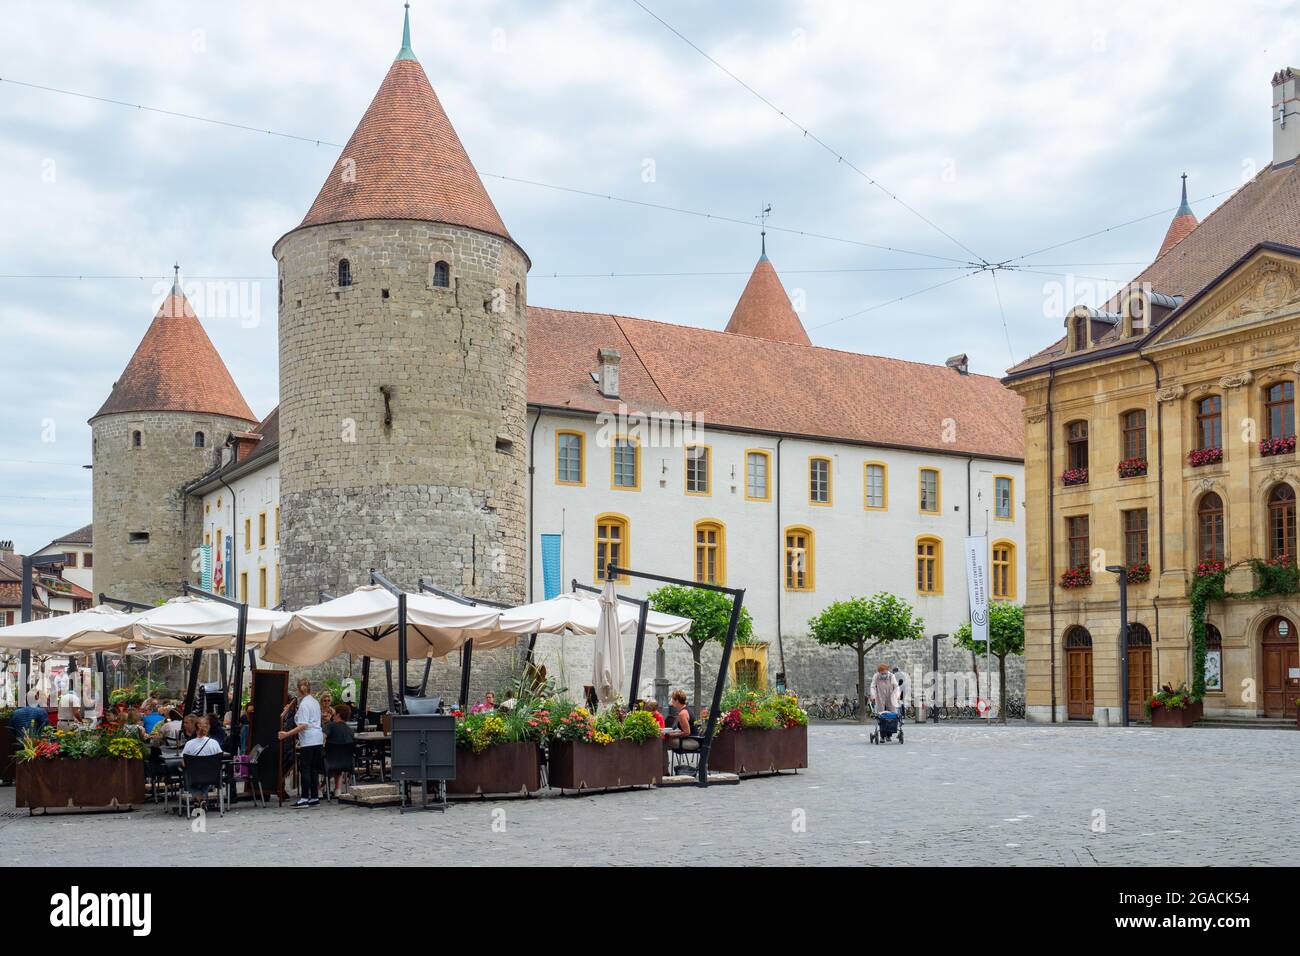 Yverdons-les-bains, Switzerland - July 11th 2021: Historic facades, a restaurant and the tower in the city centre Stock Photo